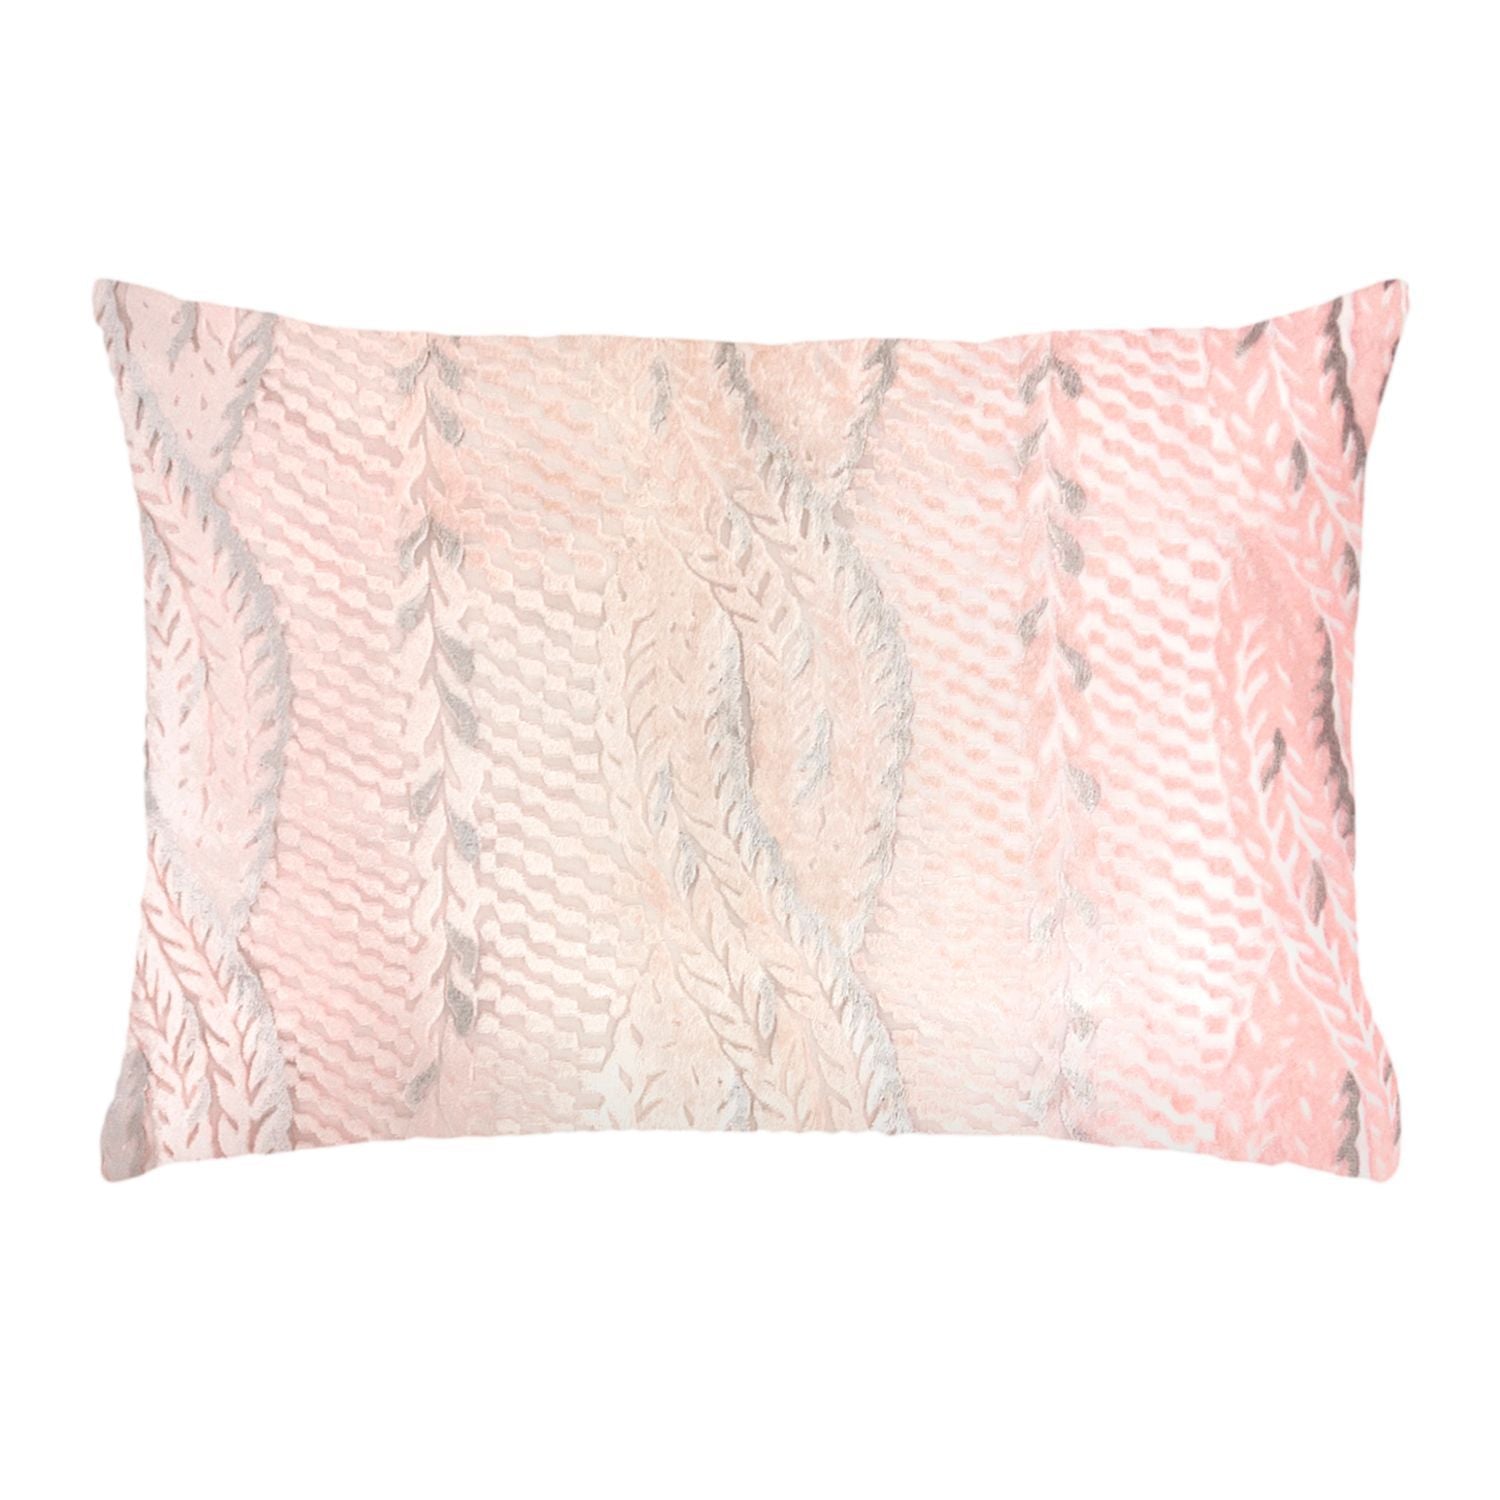 Fig Linens - Blush Cable Knit Boudoir Pillows by Kevin O'Brien Studio